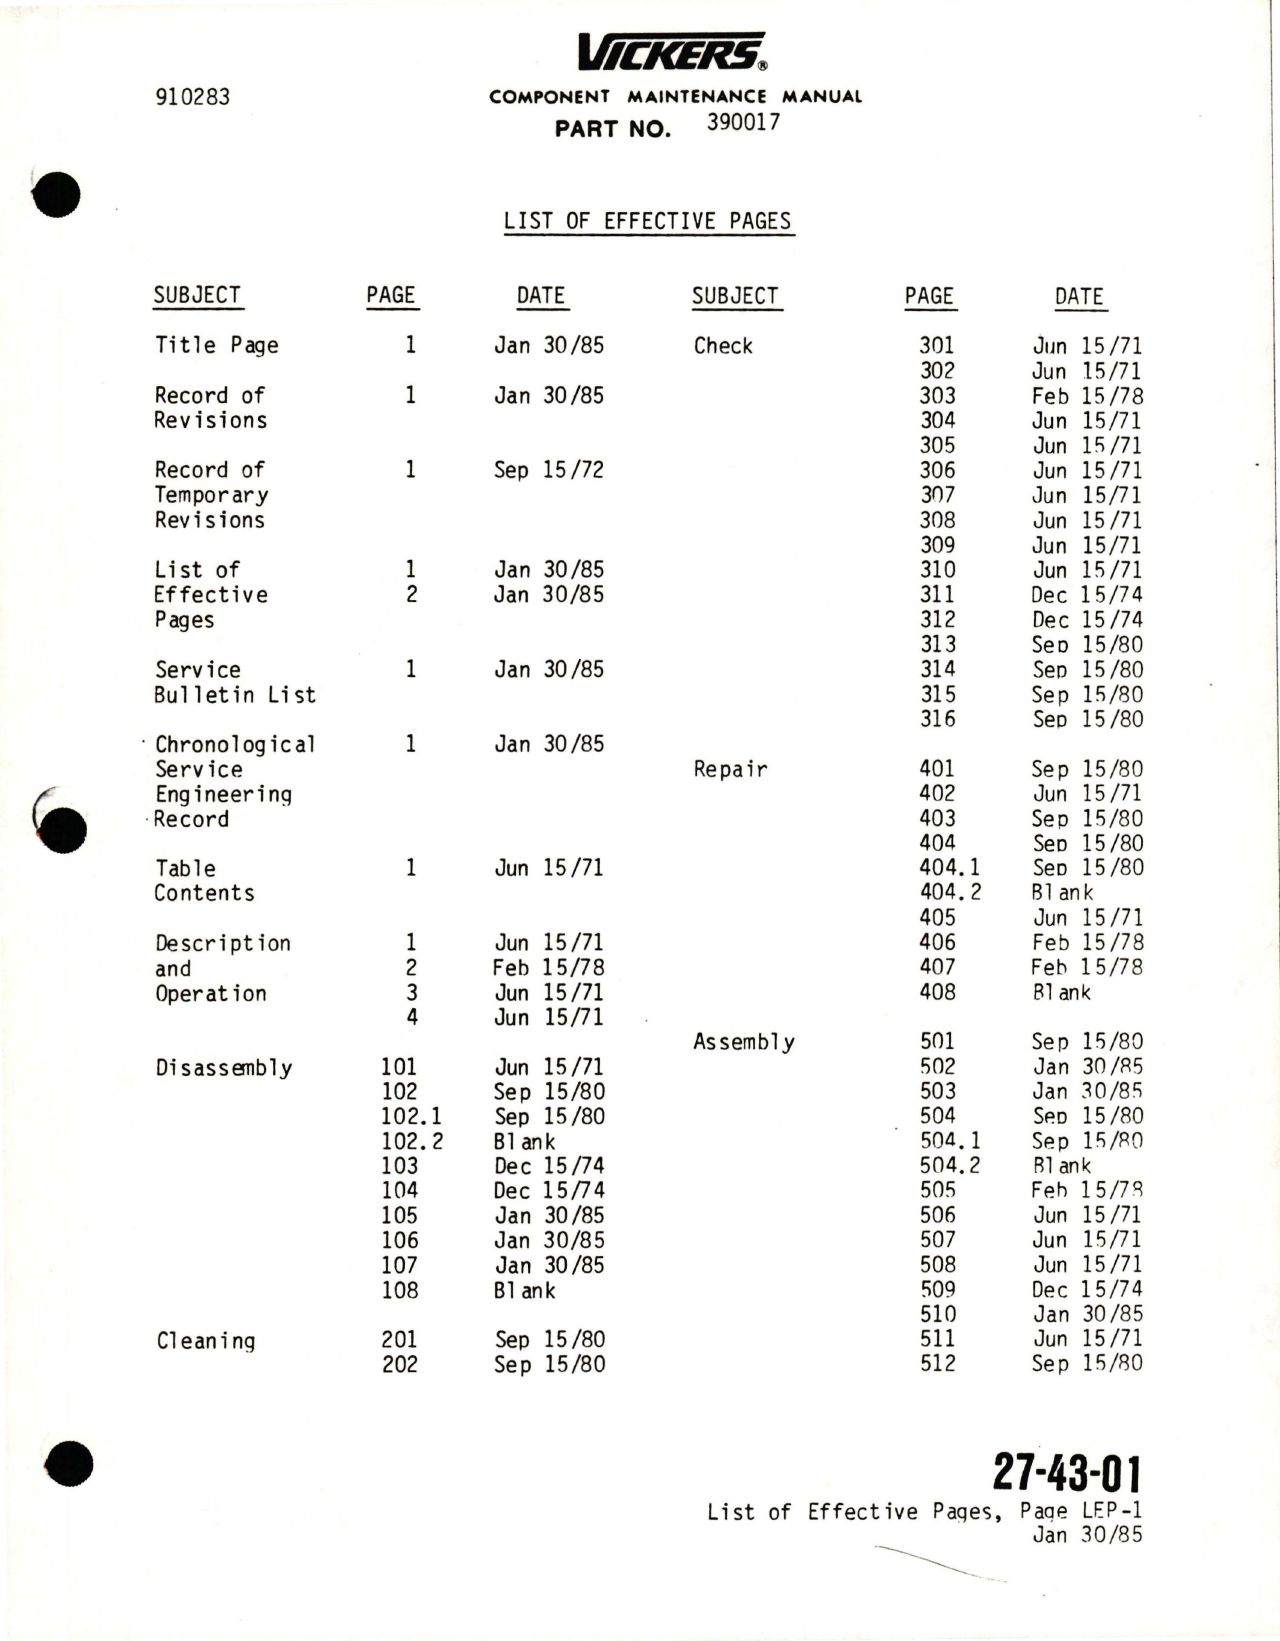 Sample page 7 from AirCorps Library document: Maintenance Manual with Illustrated Parts Breakdown for Hydraulic Motor Assembly - Model CMV3-075-1C and CMV3-075-1D